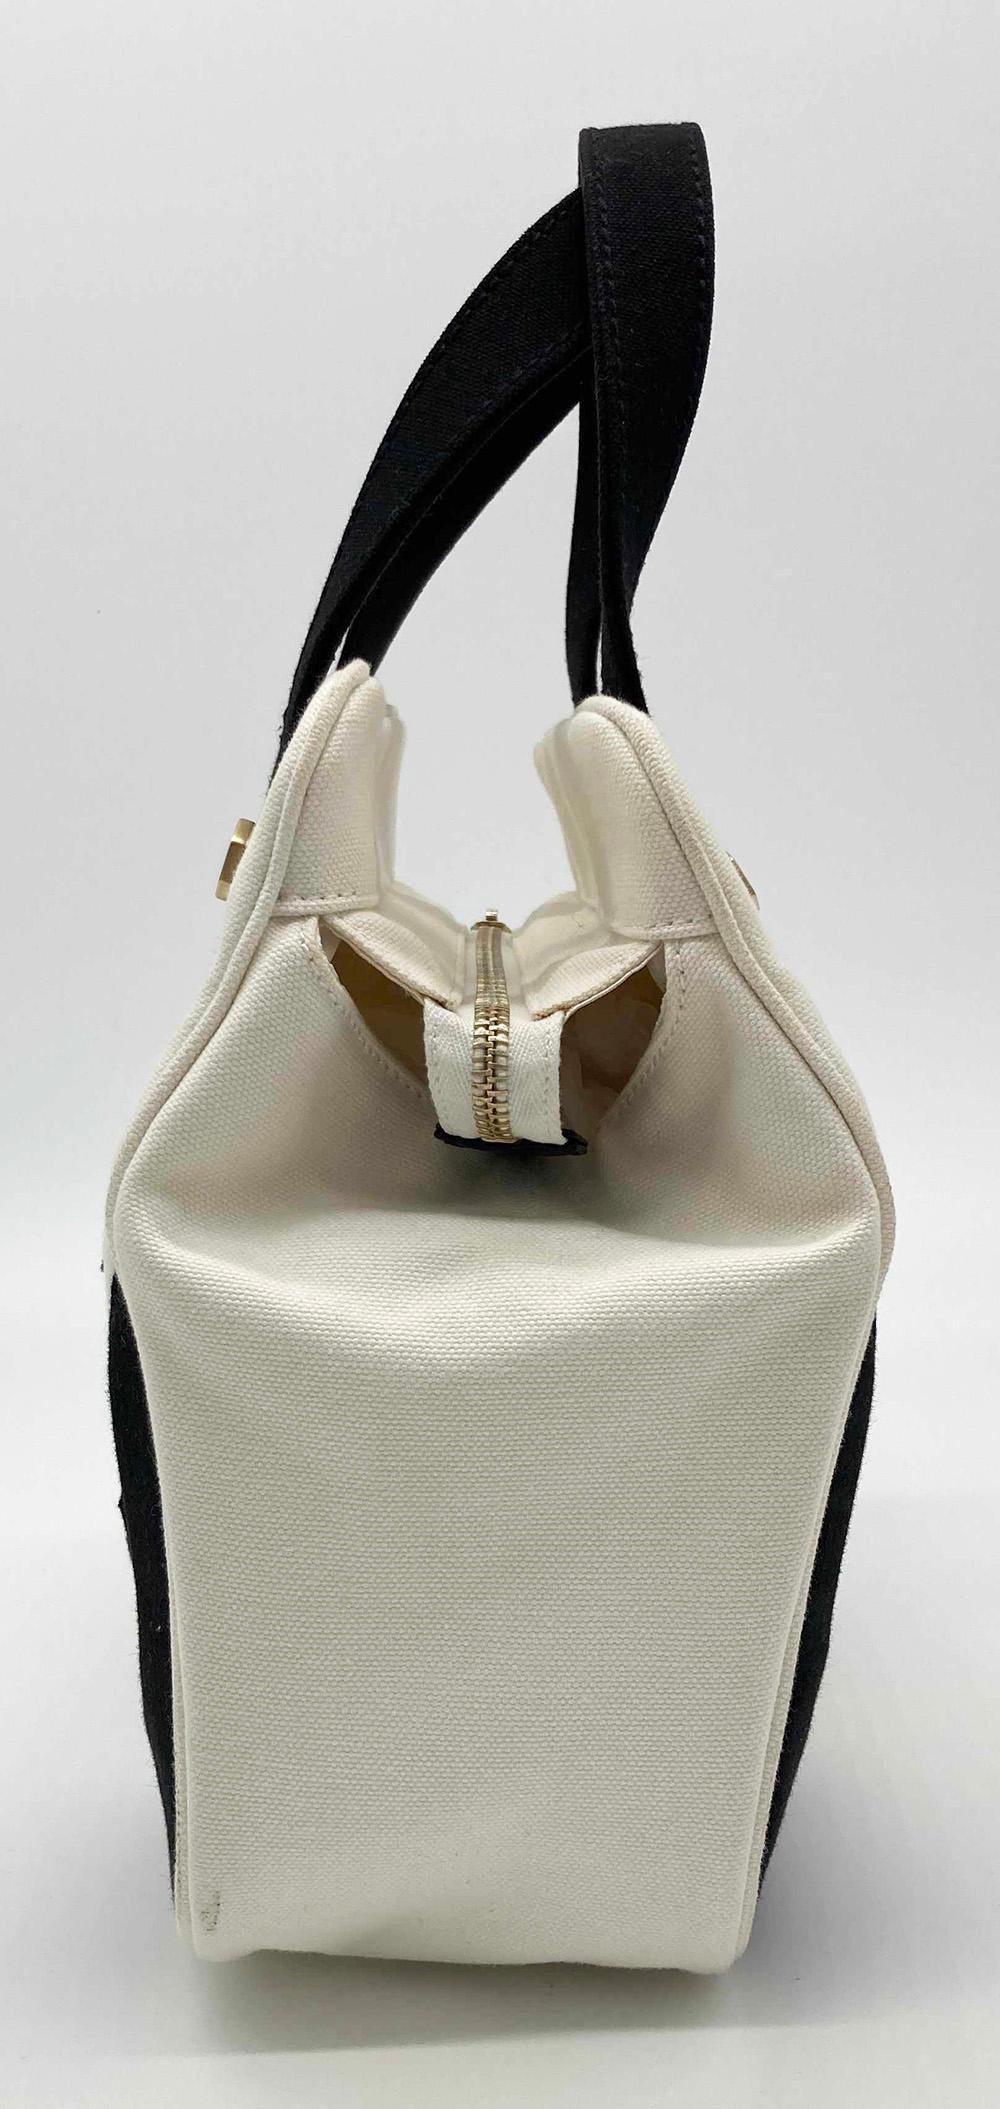 Chanel Black and White Canvas Marshmallow Bag in very good condition. Black and white canvas exterior with top zipper closure and double black canvas handles. White nylon interior with one zip pocket. Light tiny small spots of discoloration